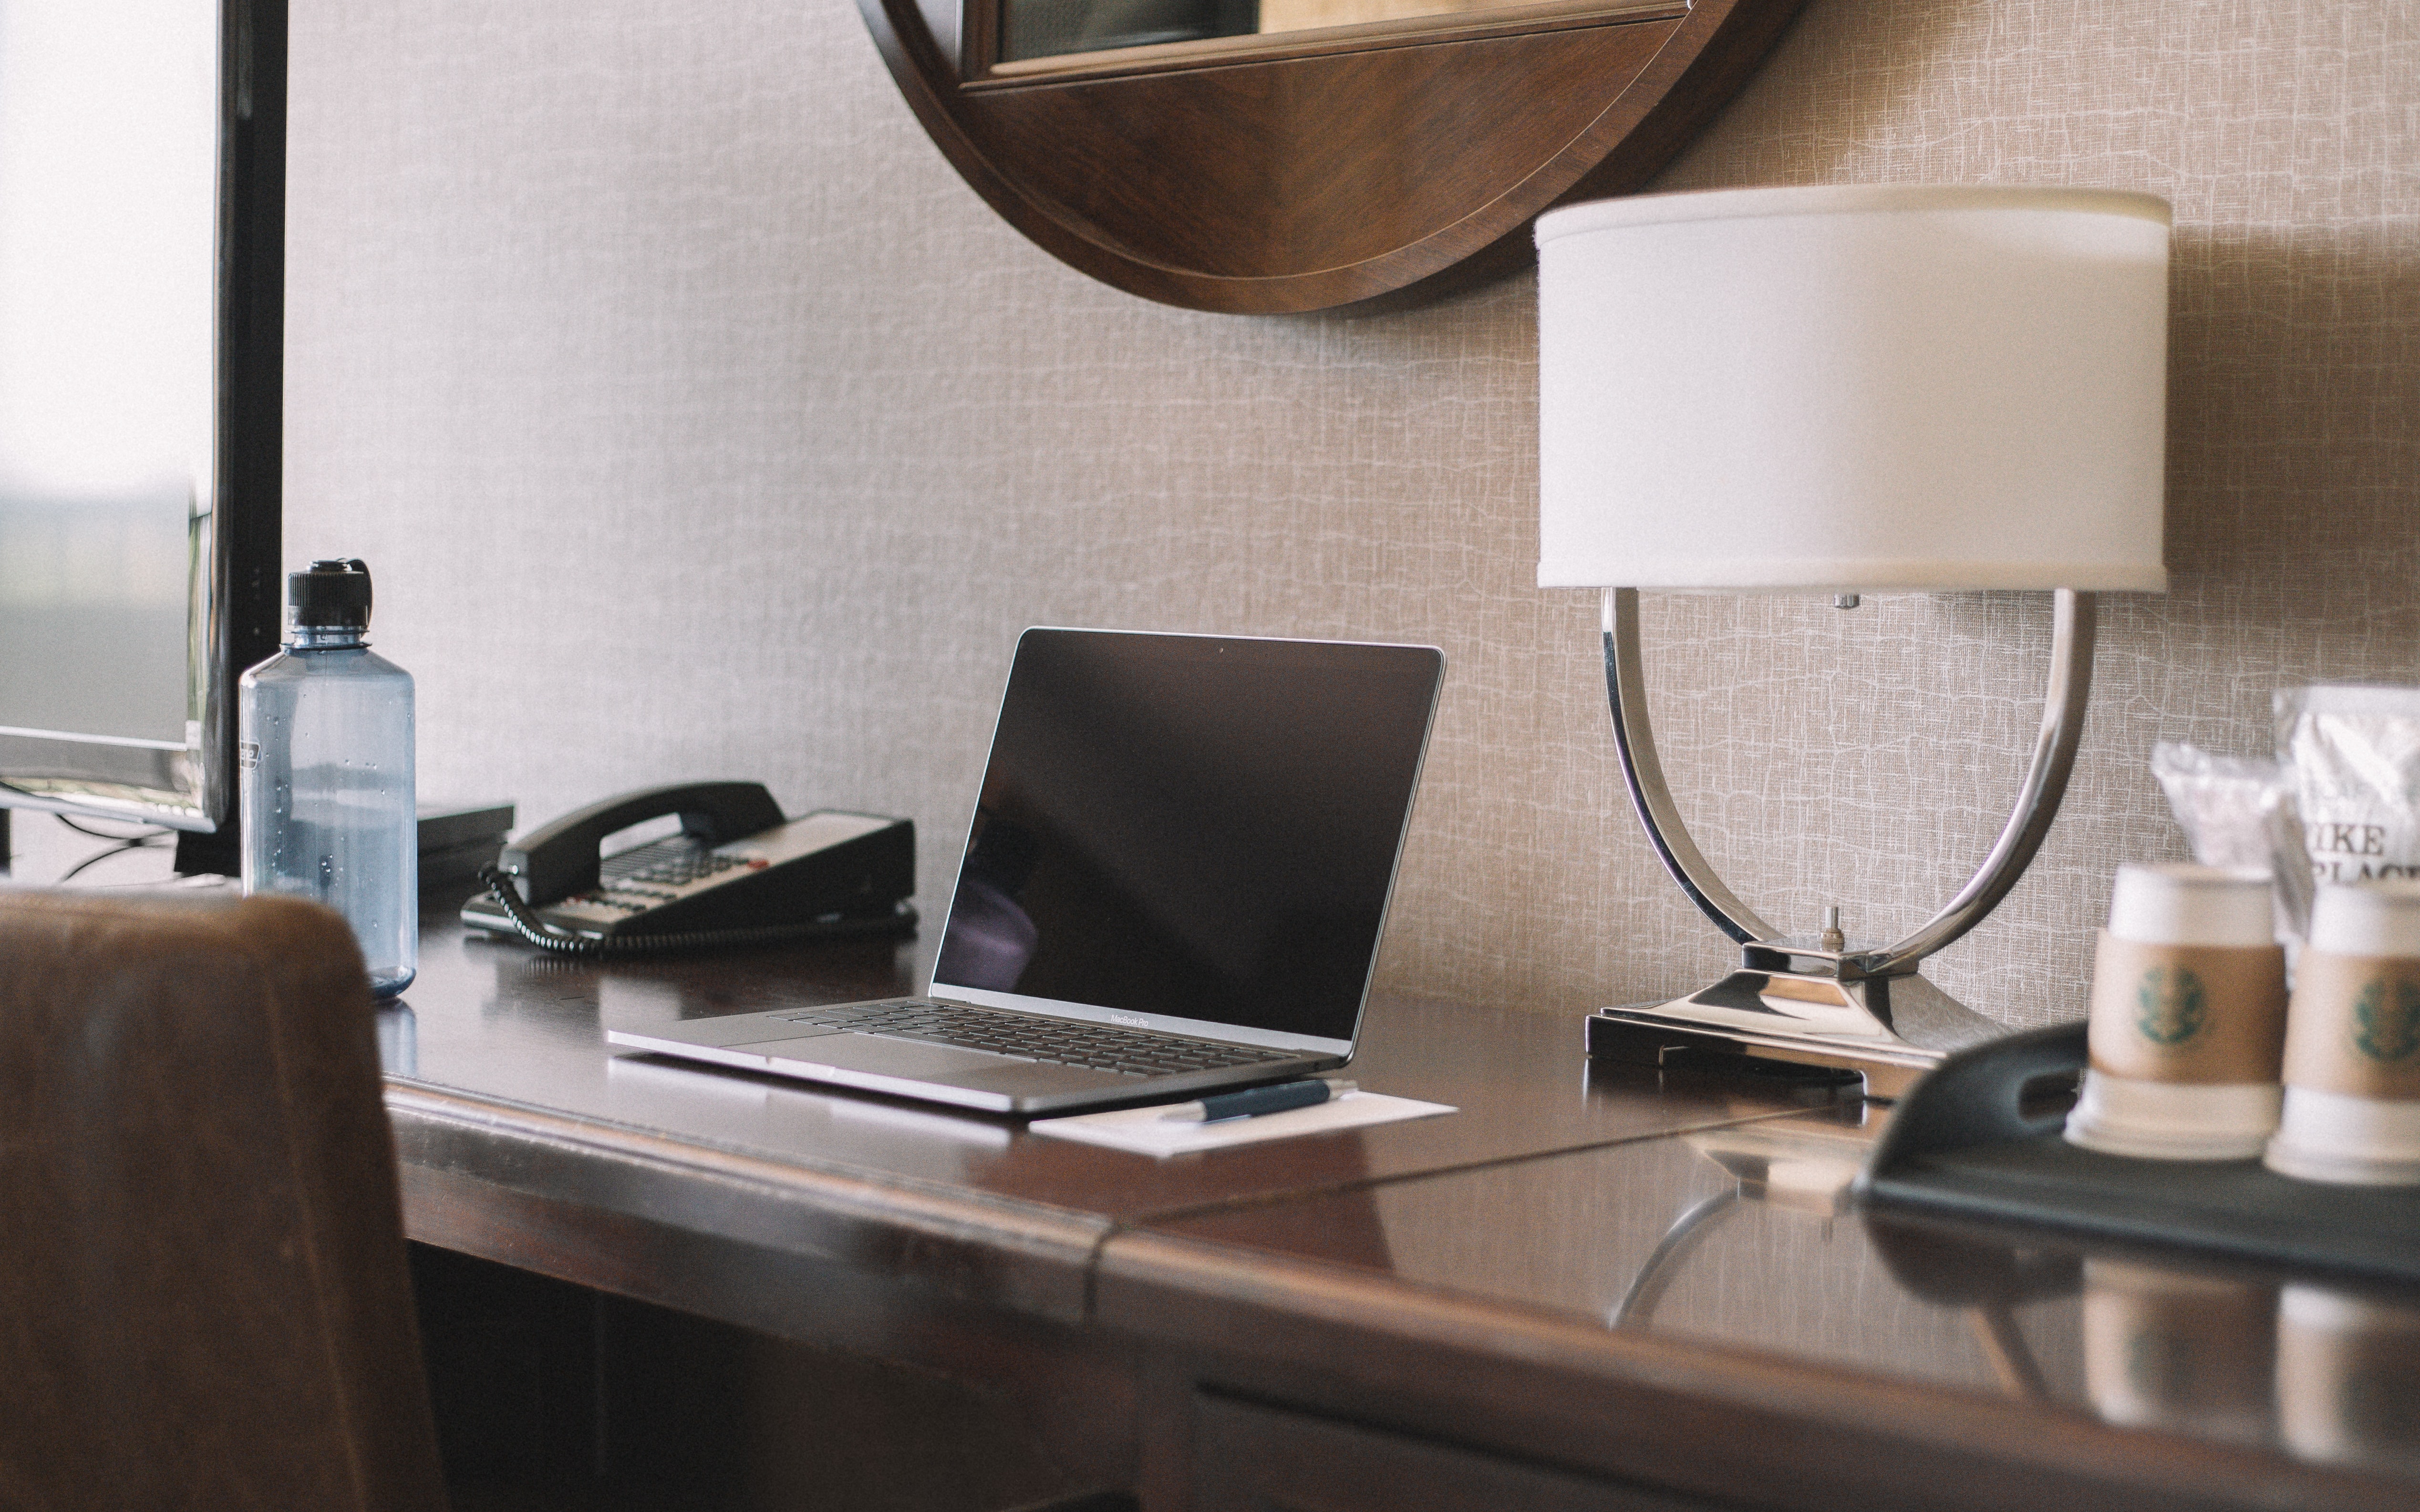 5 Work-from-Hotel Strategies to Attract Remote Workers